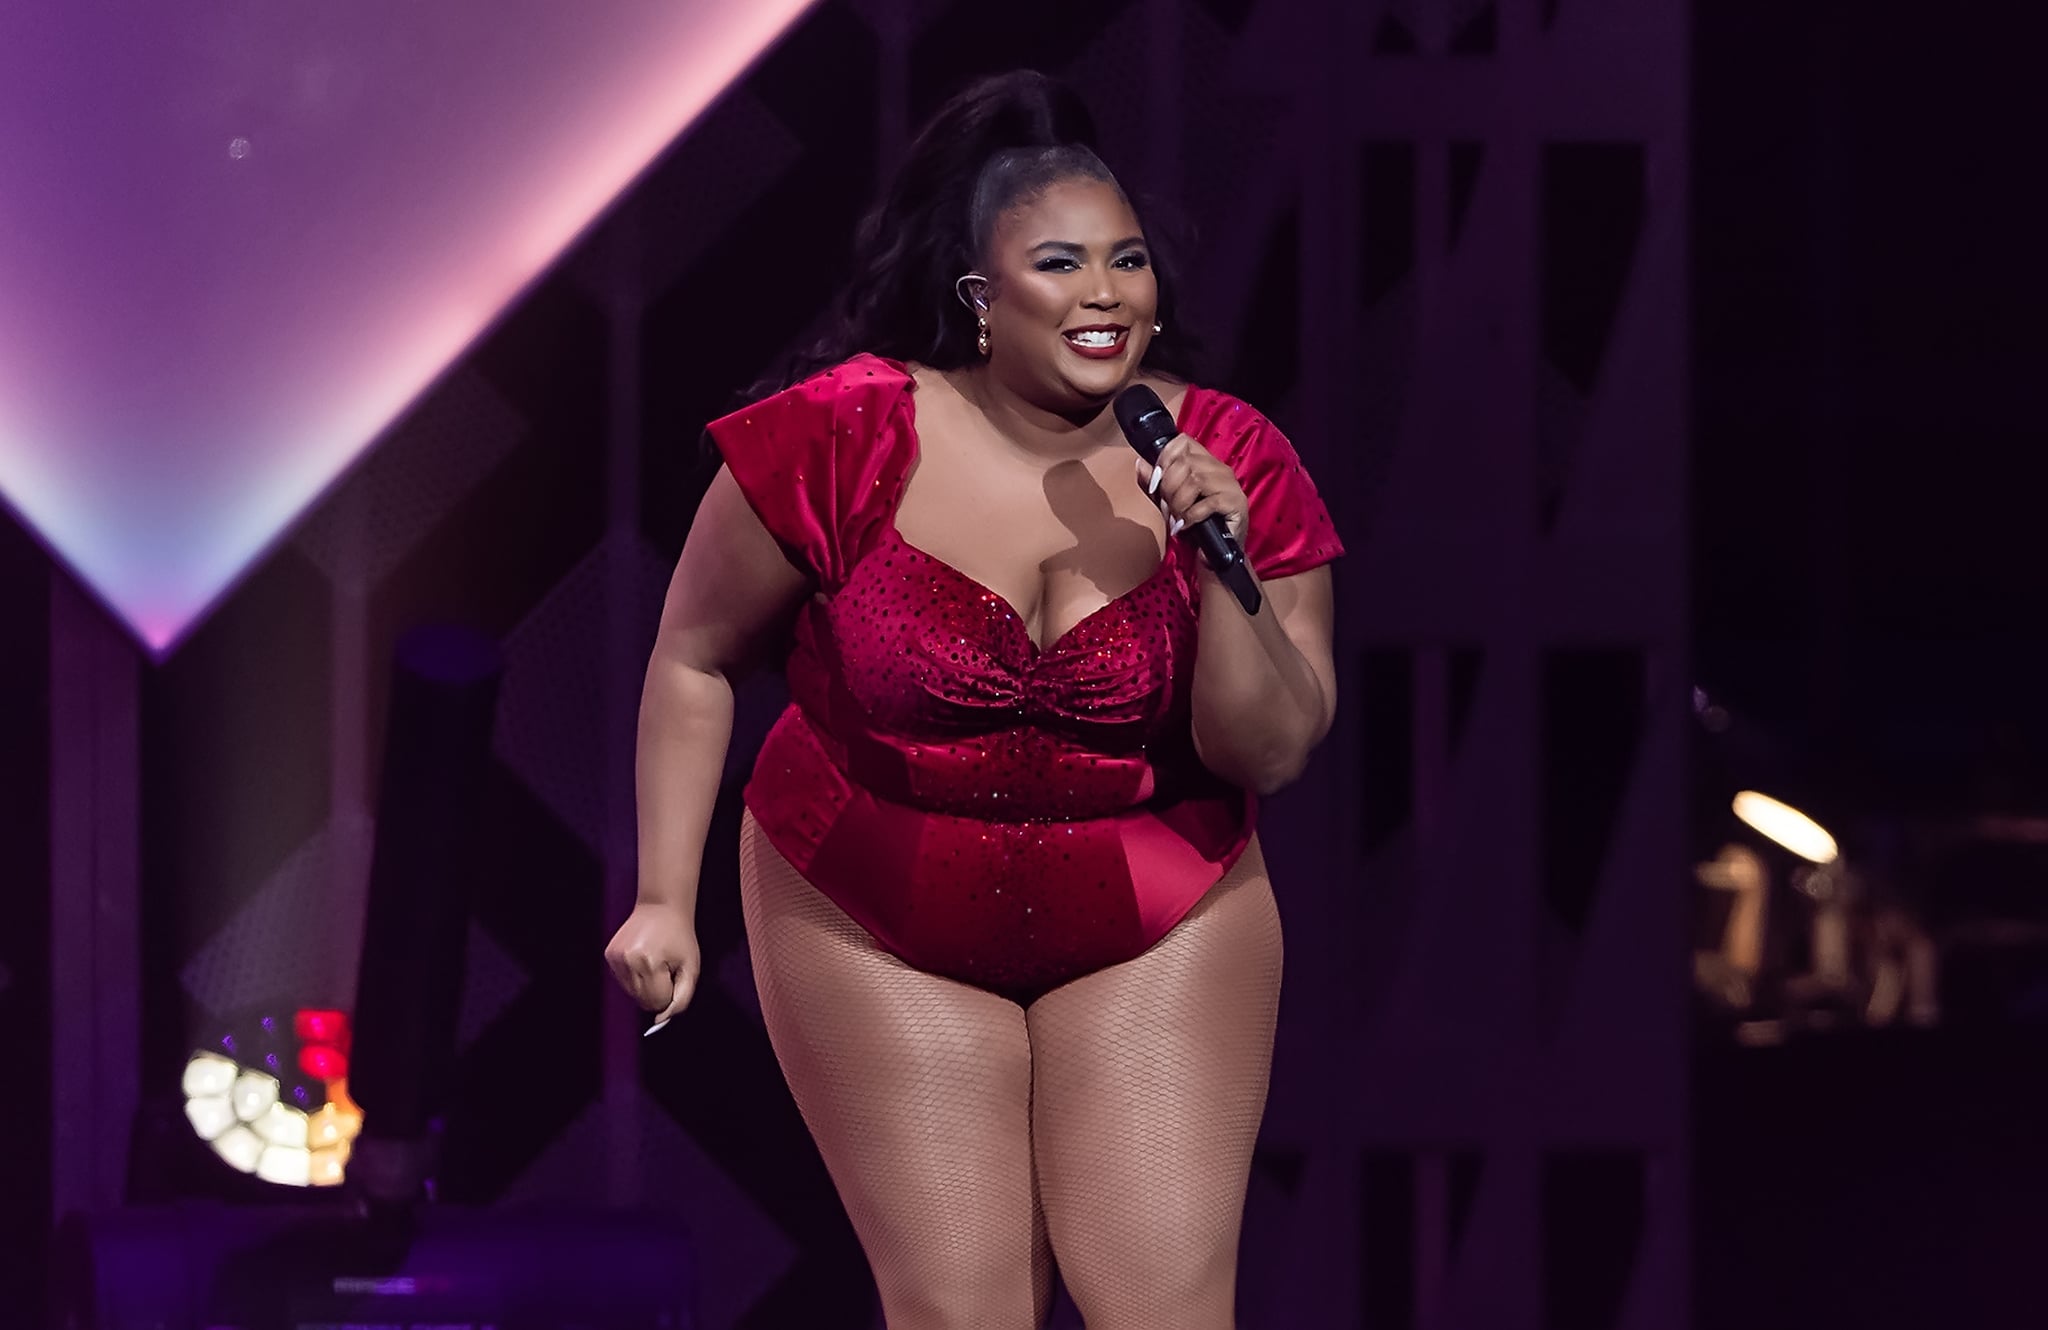 PHILADELPHIA, PENNSYLVANIA - DECEMBER 11: Singer Lizzo performs on stage during Q102 - Lizzo Shares Inspirational Throwback Photo's iHeartRadio Jingle Ball 2019 at Wells Fargo Center on December 11, 2019 in Philadelphia, Pennsylvania. (Photo by Gilbert Carrasquillo/Getty Images)